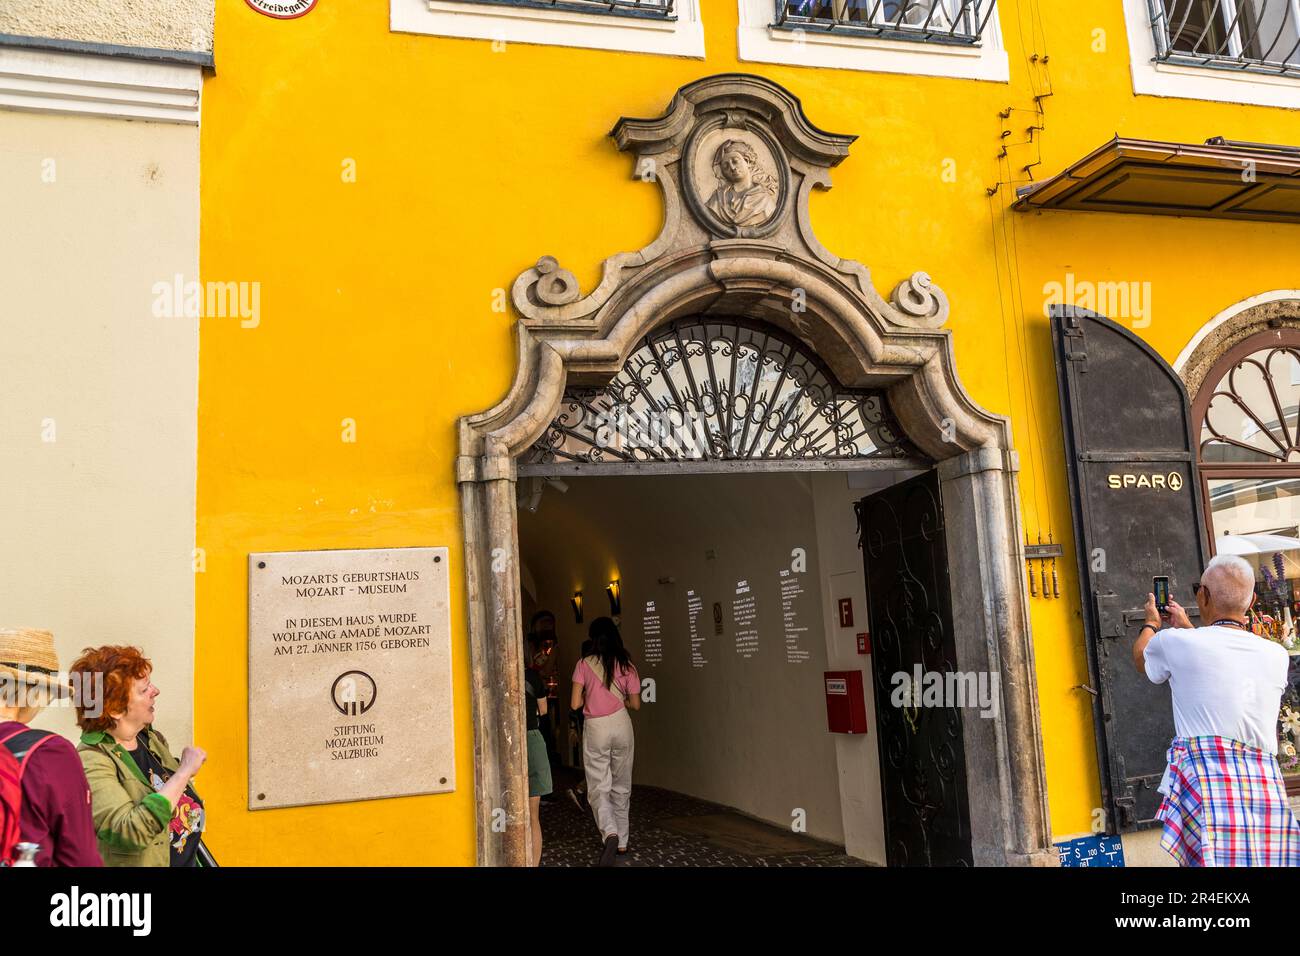 Mozart's birthplace at Getreidegasse 9 in Salzburg, Austria. Until 1994, the first floor housed a delicatessen and direct successor to the 'Alte Hagenauerische Specereywarenhandlung'. Today, the SPAR supermarket chain supplies tourists from all over the world with drinks and snacks here Stock Photo